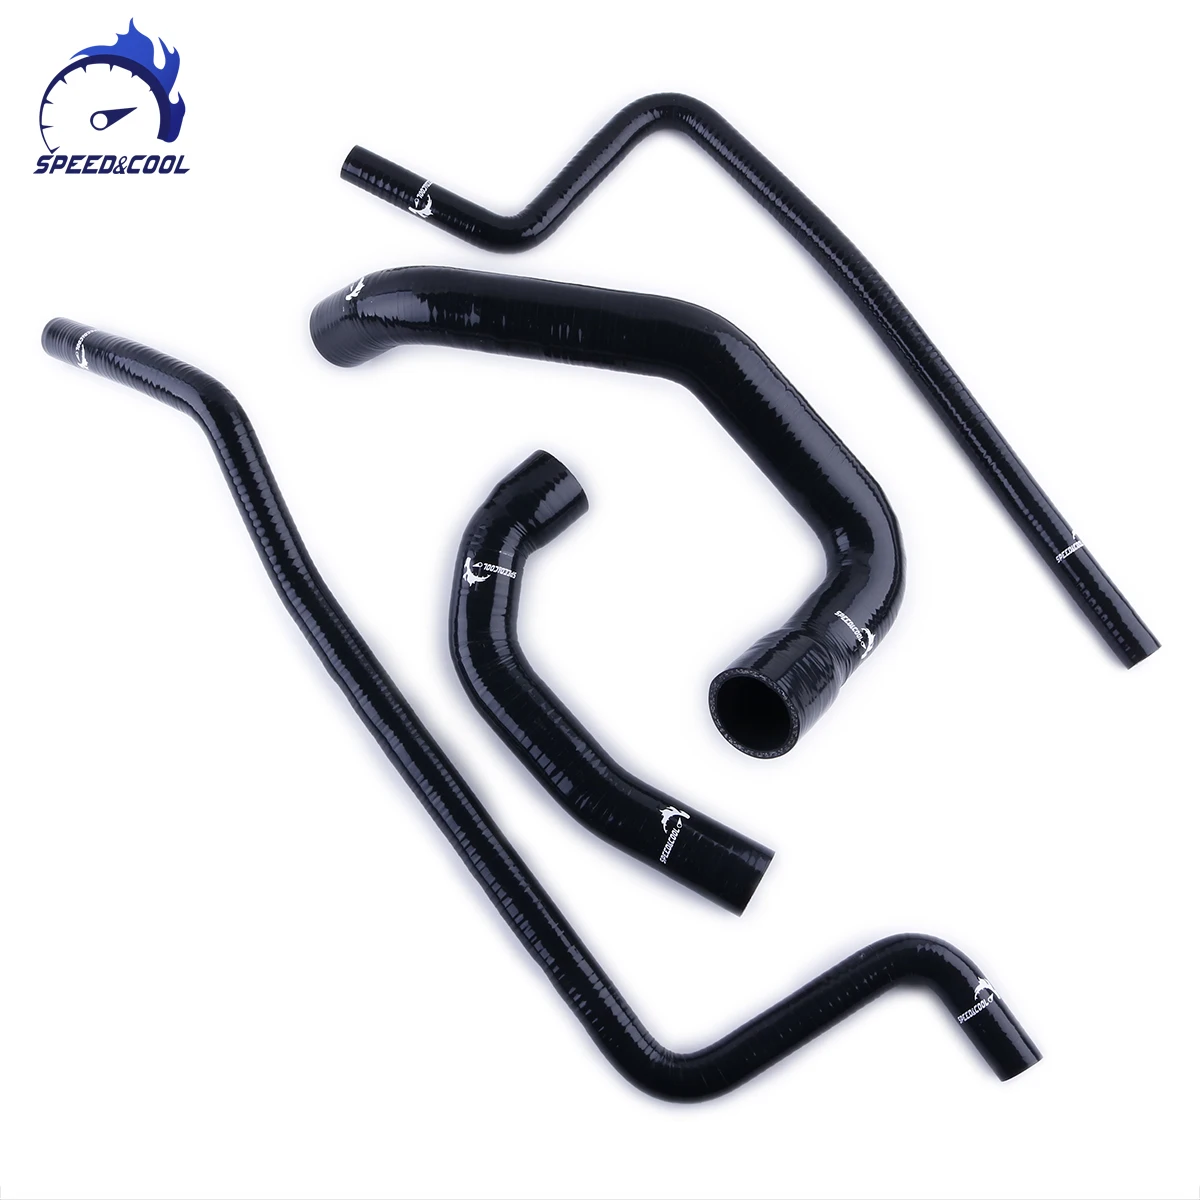 Car Silicone Radiator Coolant Hose Kit For Jeep Wrangler Tj  1997-2001  High Performance Pressure - Hoses & Clamps - AliExpress